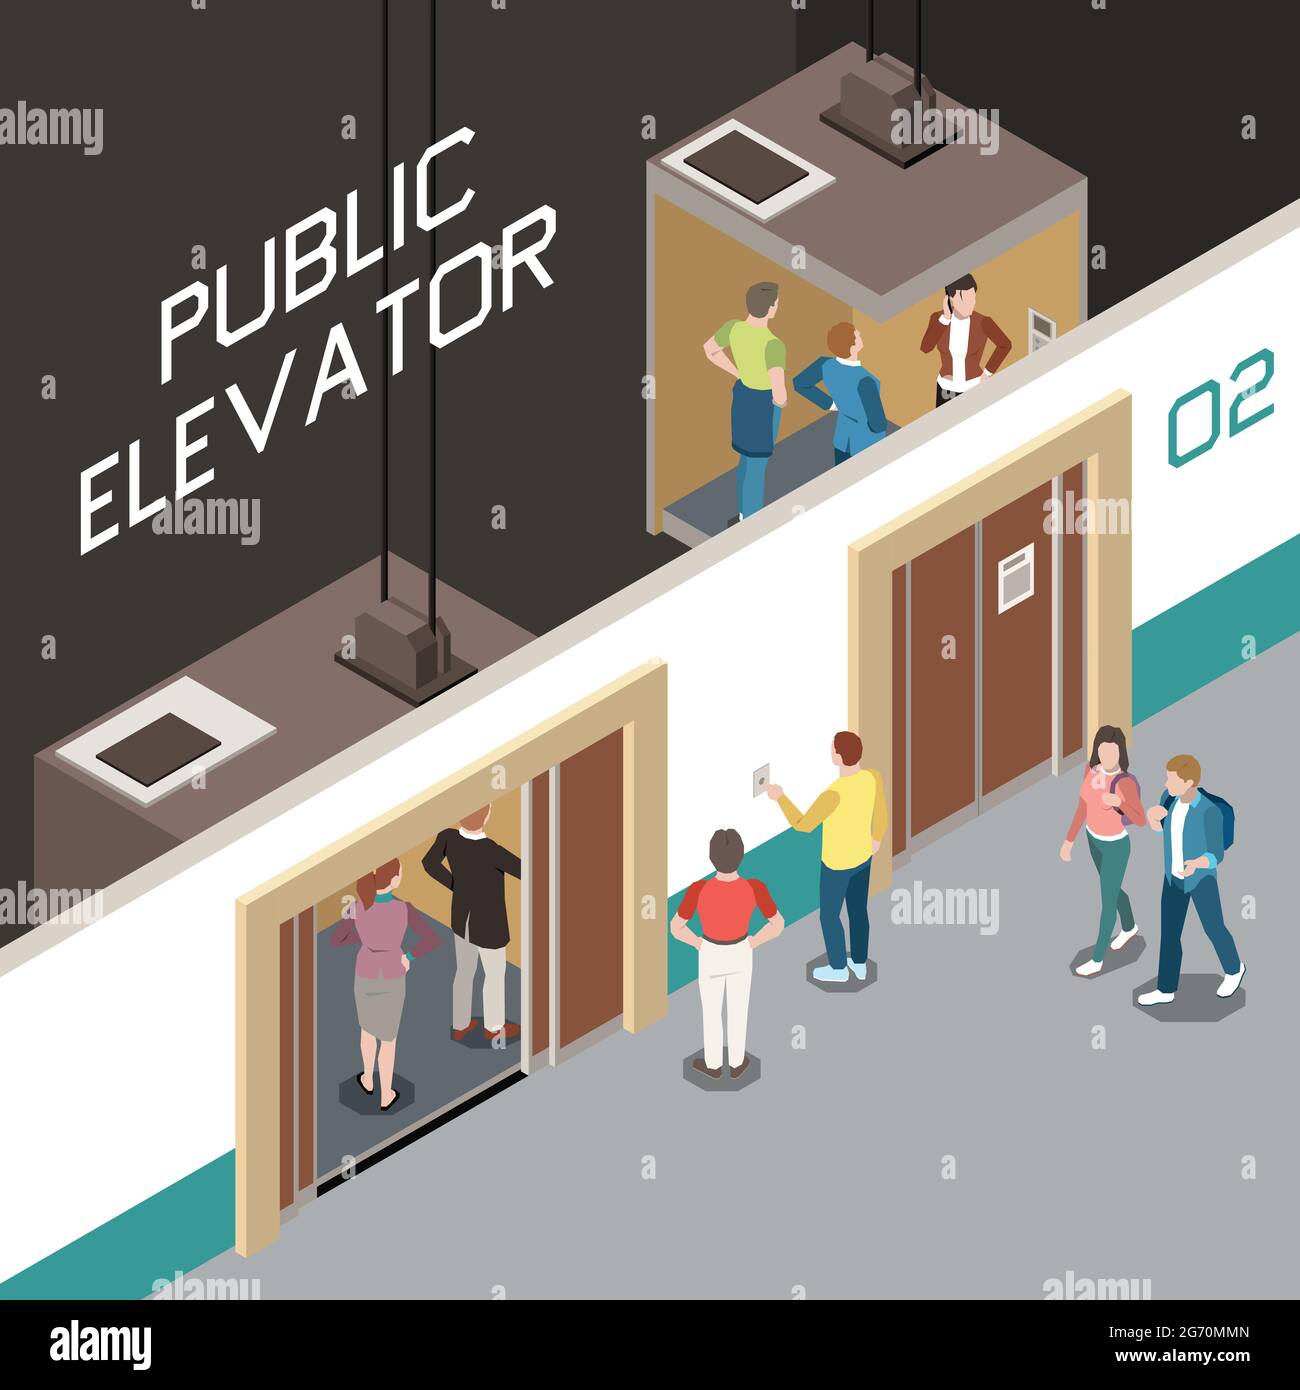 Isometric composition with lift shaft and people using public elevator 3d vector illustration Stock Vector